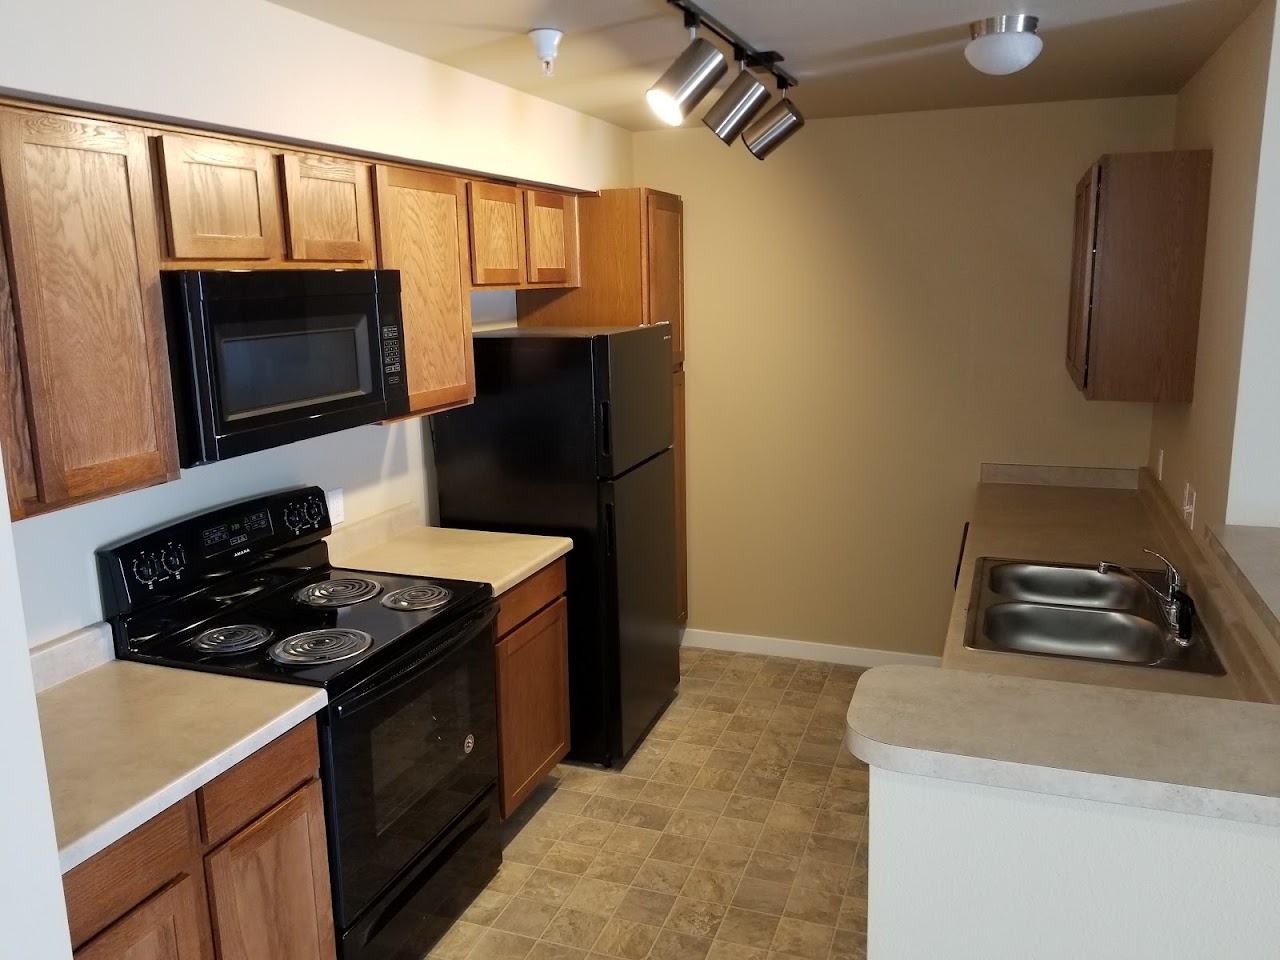 Photo of TULLAMORE COMMONS. Affordable housing located at 3797 EAST CARRADALE AVENUE POST FALLS, ID 83854